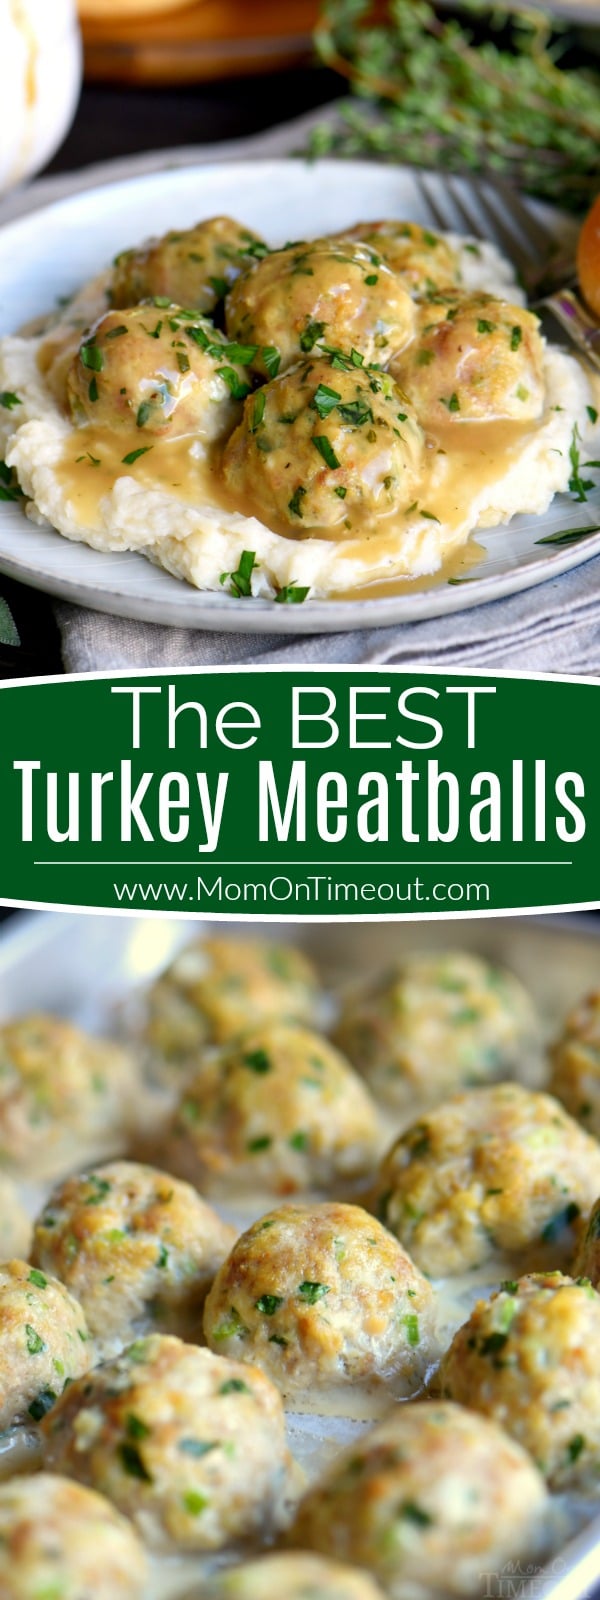 The BEST Turkey Meatballs can be on your table in less than 30 minutes! These baked turkey meatballs are perfectly seasoned and exceptionally delicious. Topped with a simple herbed gravy, they're impossible to resist! // Mom On Timeout